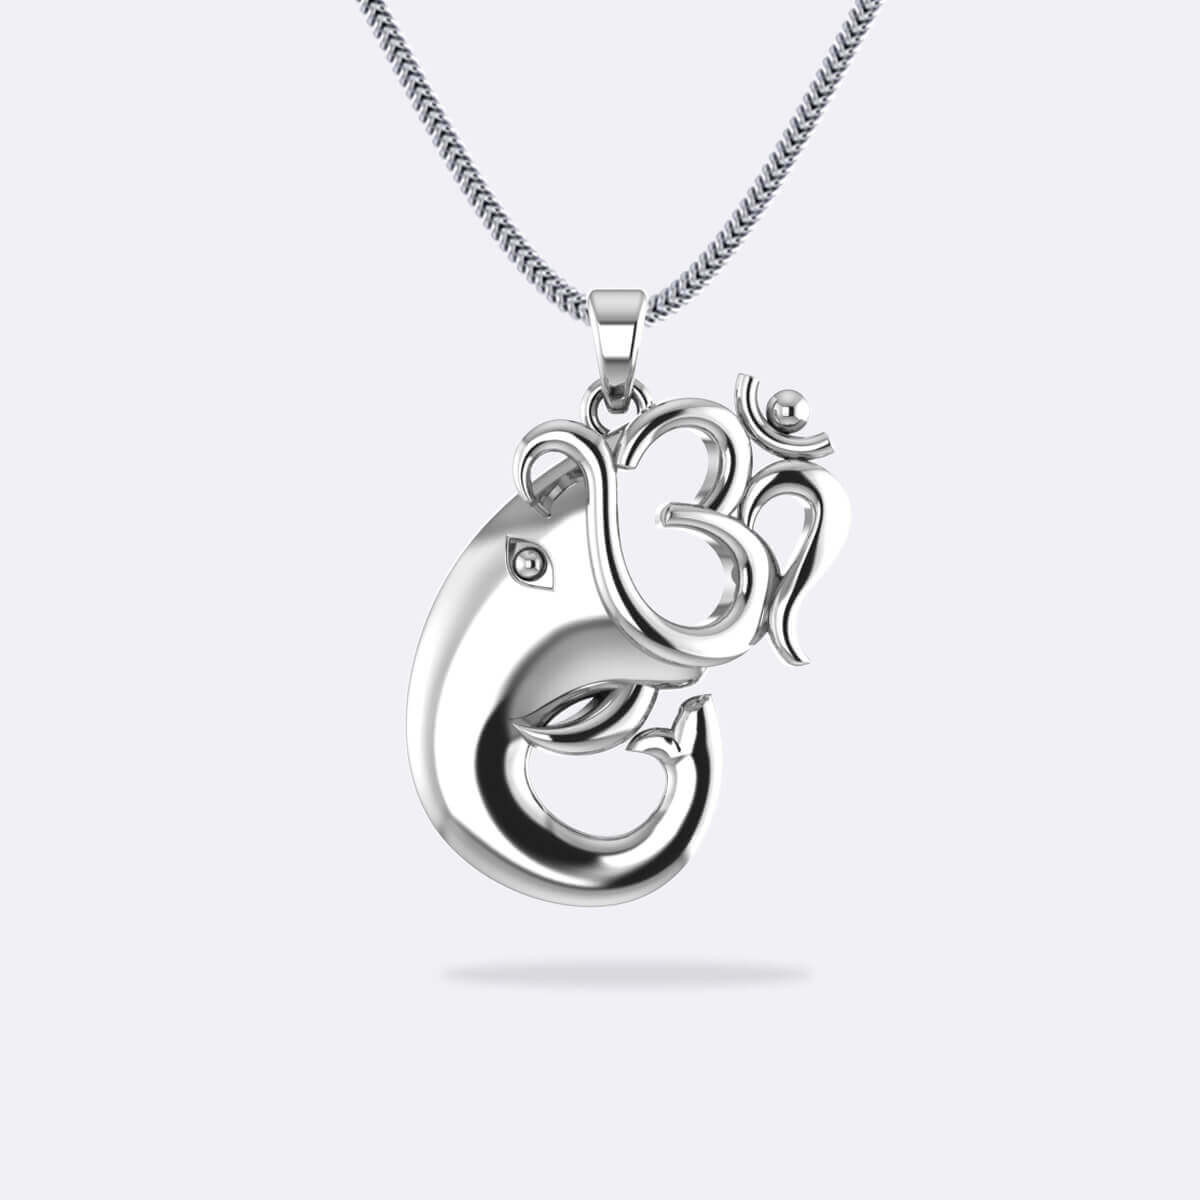 Lord Ganesha Silver Pendant with Om Design